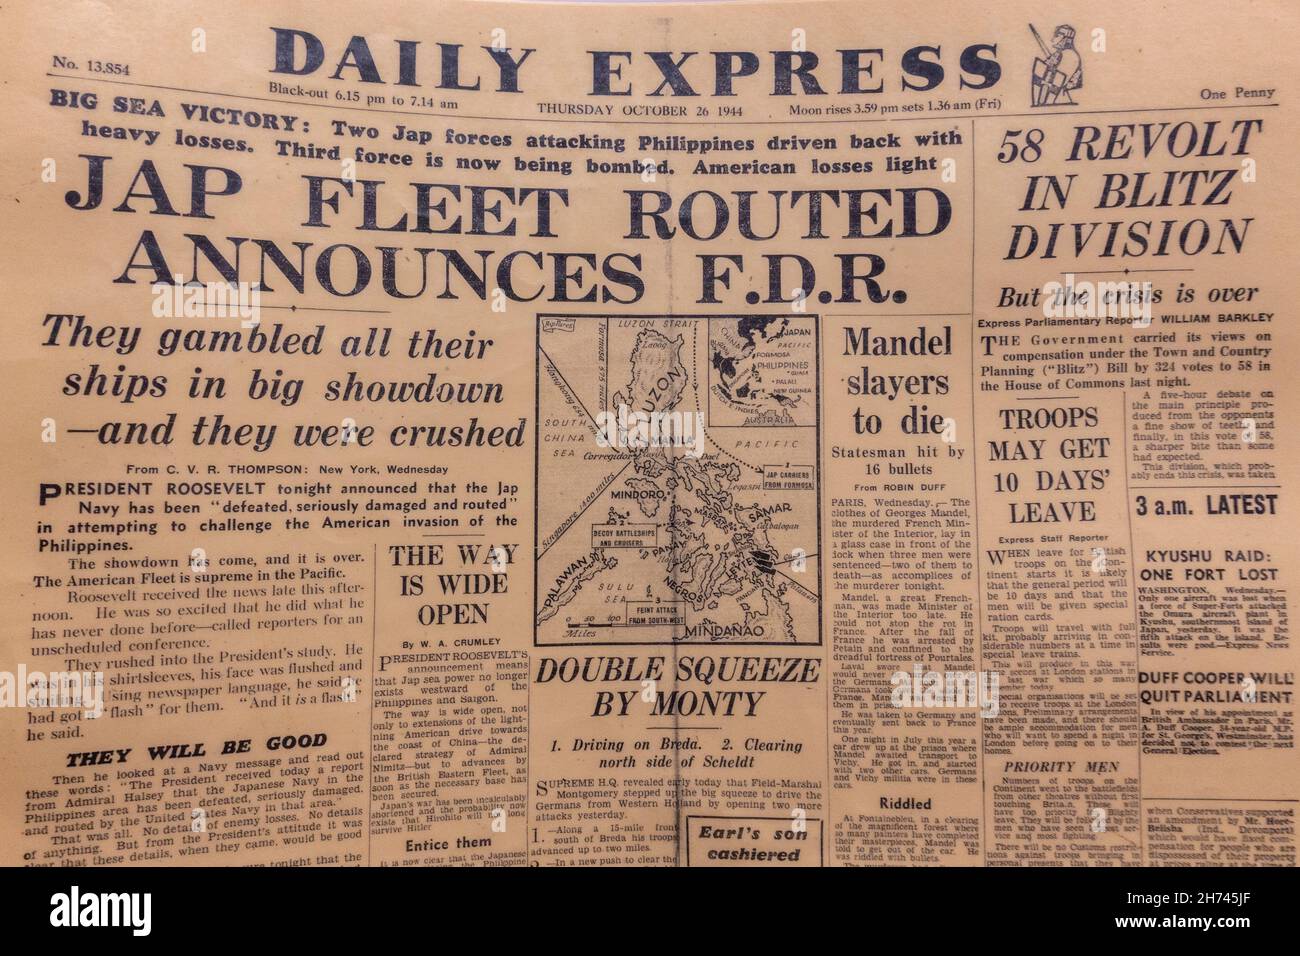 'Jap Fleet Routed Announces FDR' front page of the Daily Express on 26th October 1944 during World War Two. Stock Photo